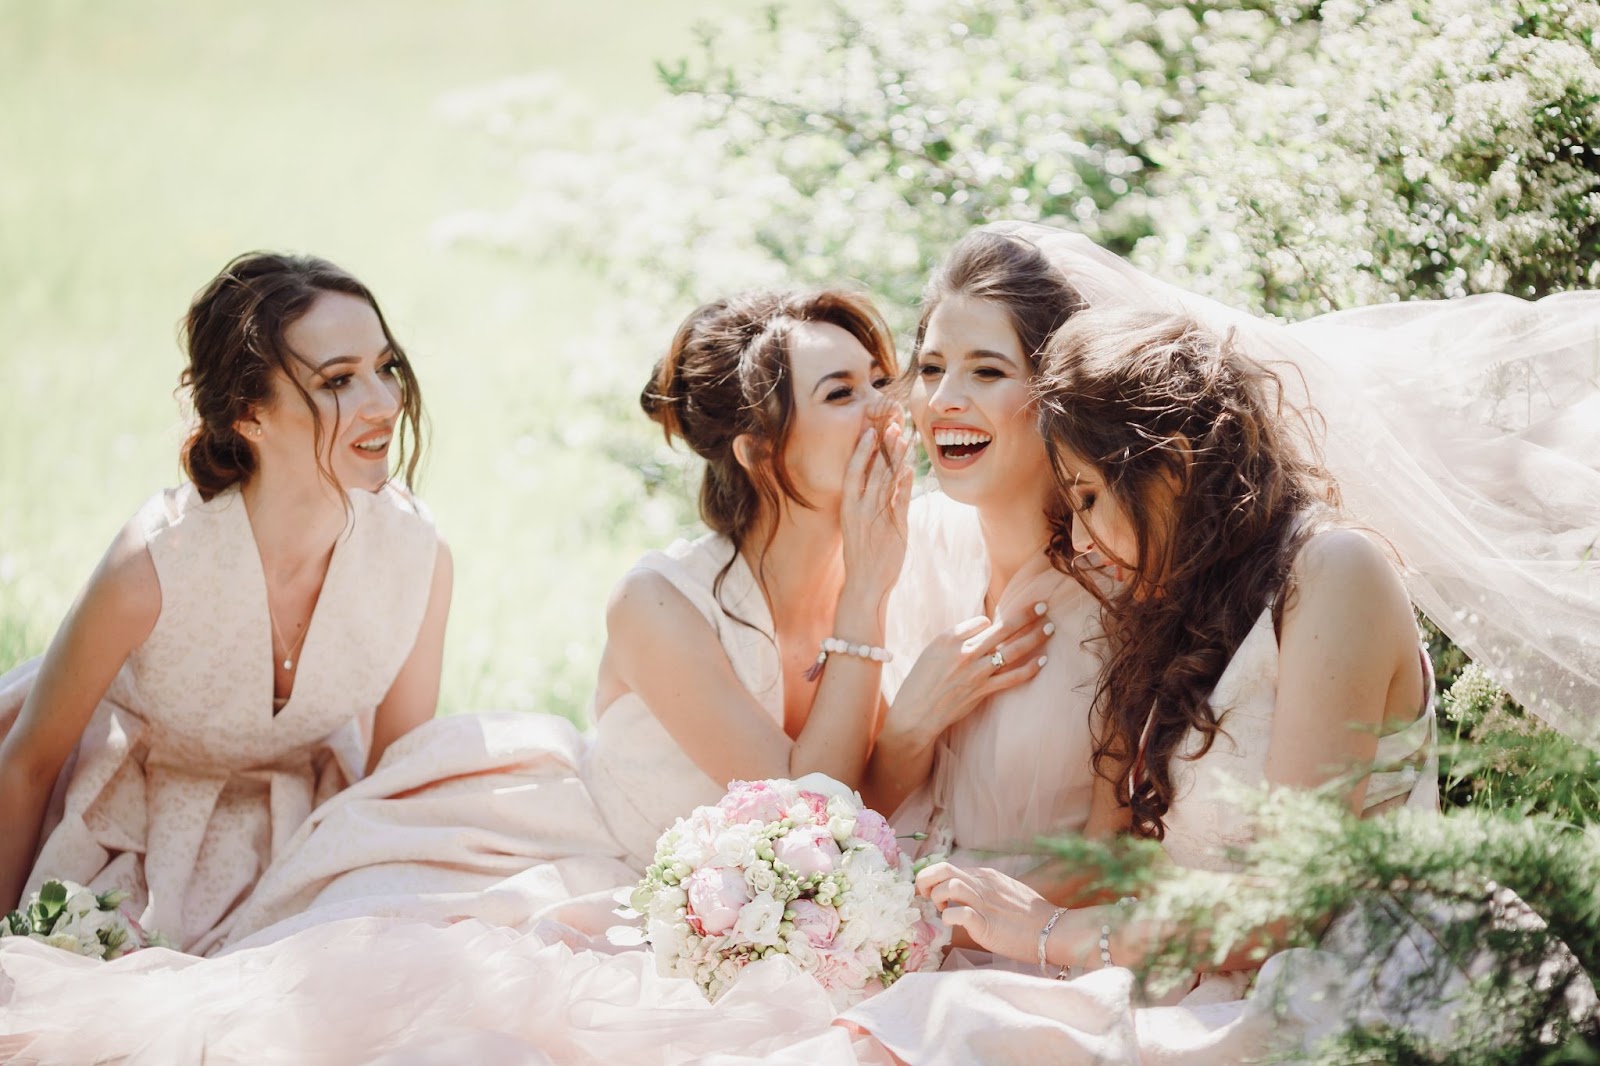 The tradition of dressing bridesmaids in crazy outlandish garments stemmed from the necessity to help the bride look their best